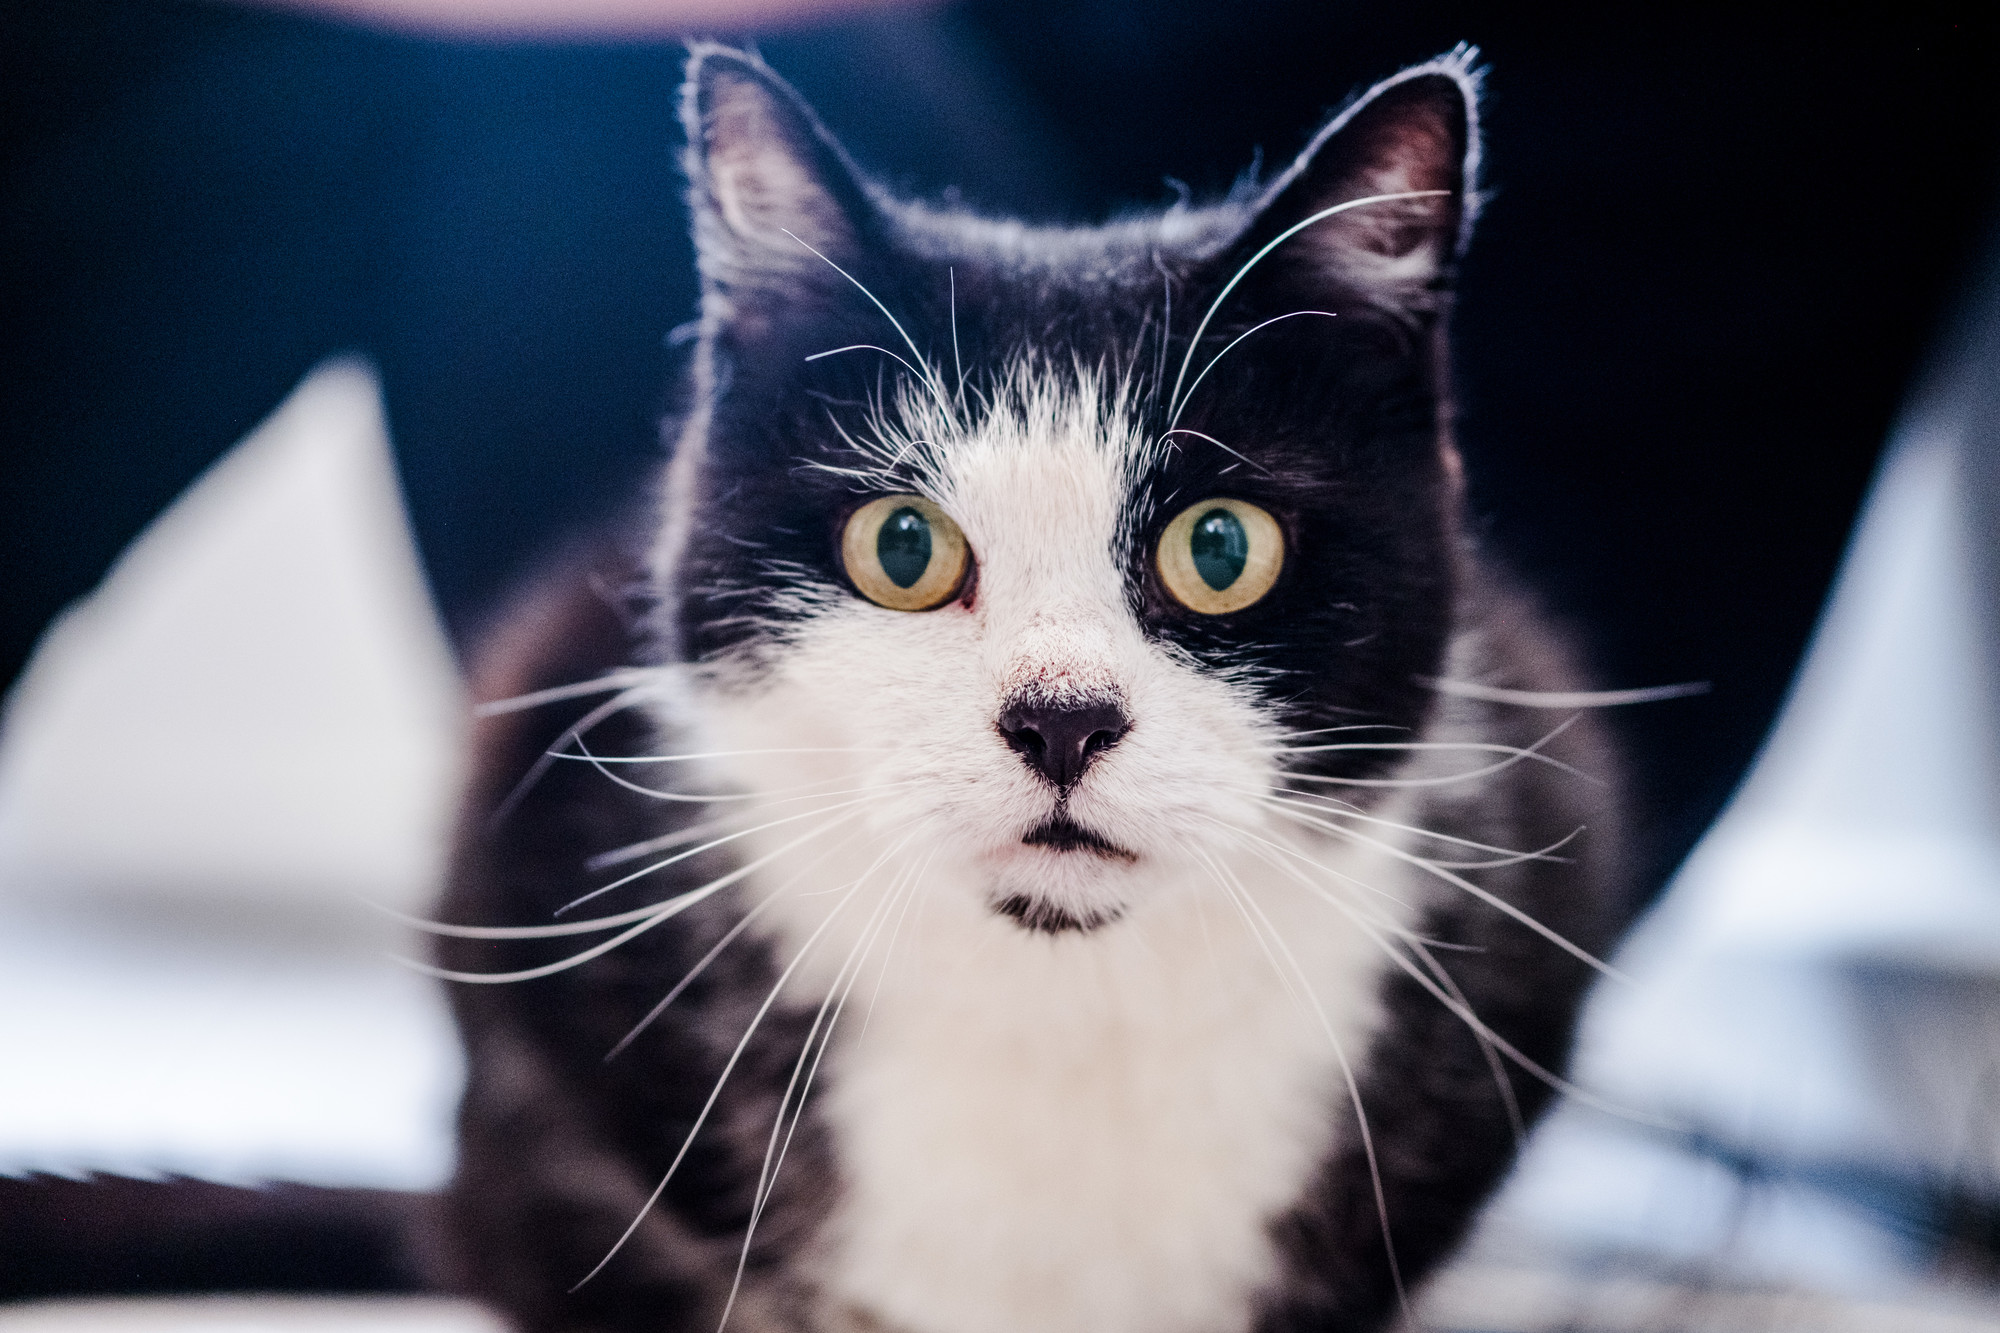 a black and white cat looks directly at the camera lens